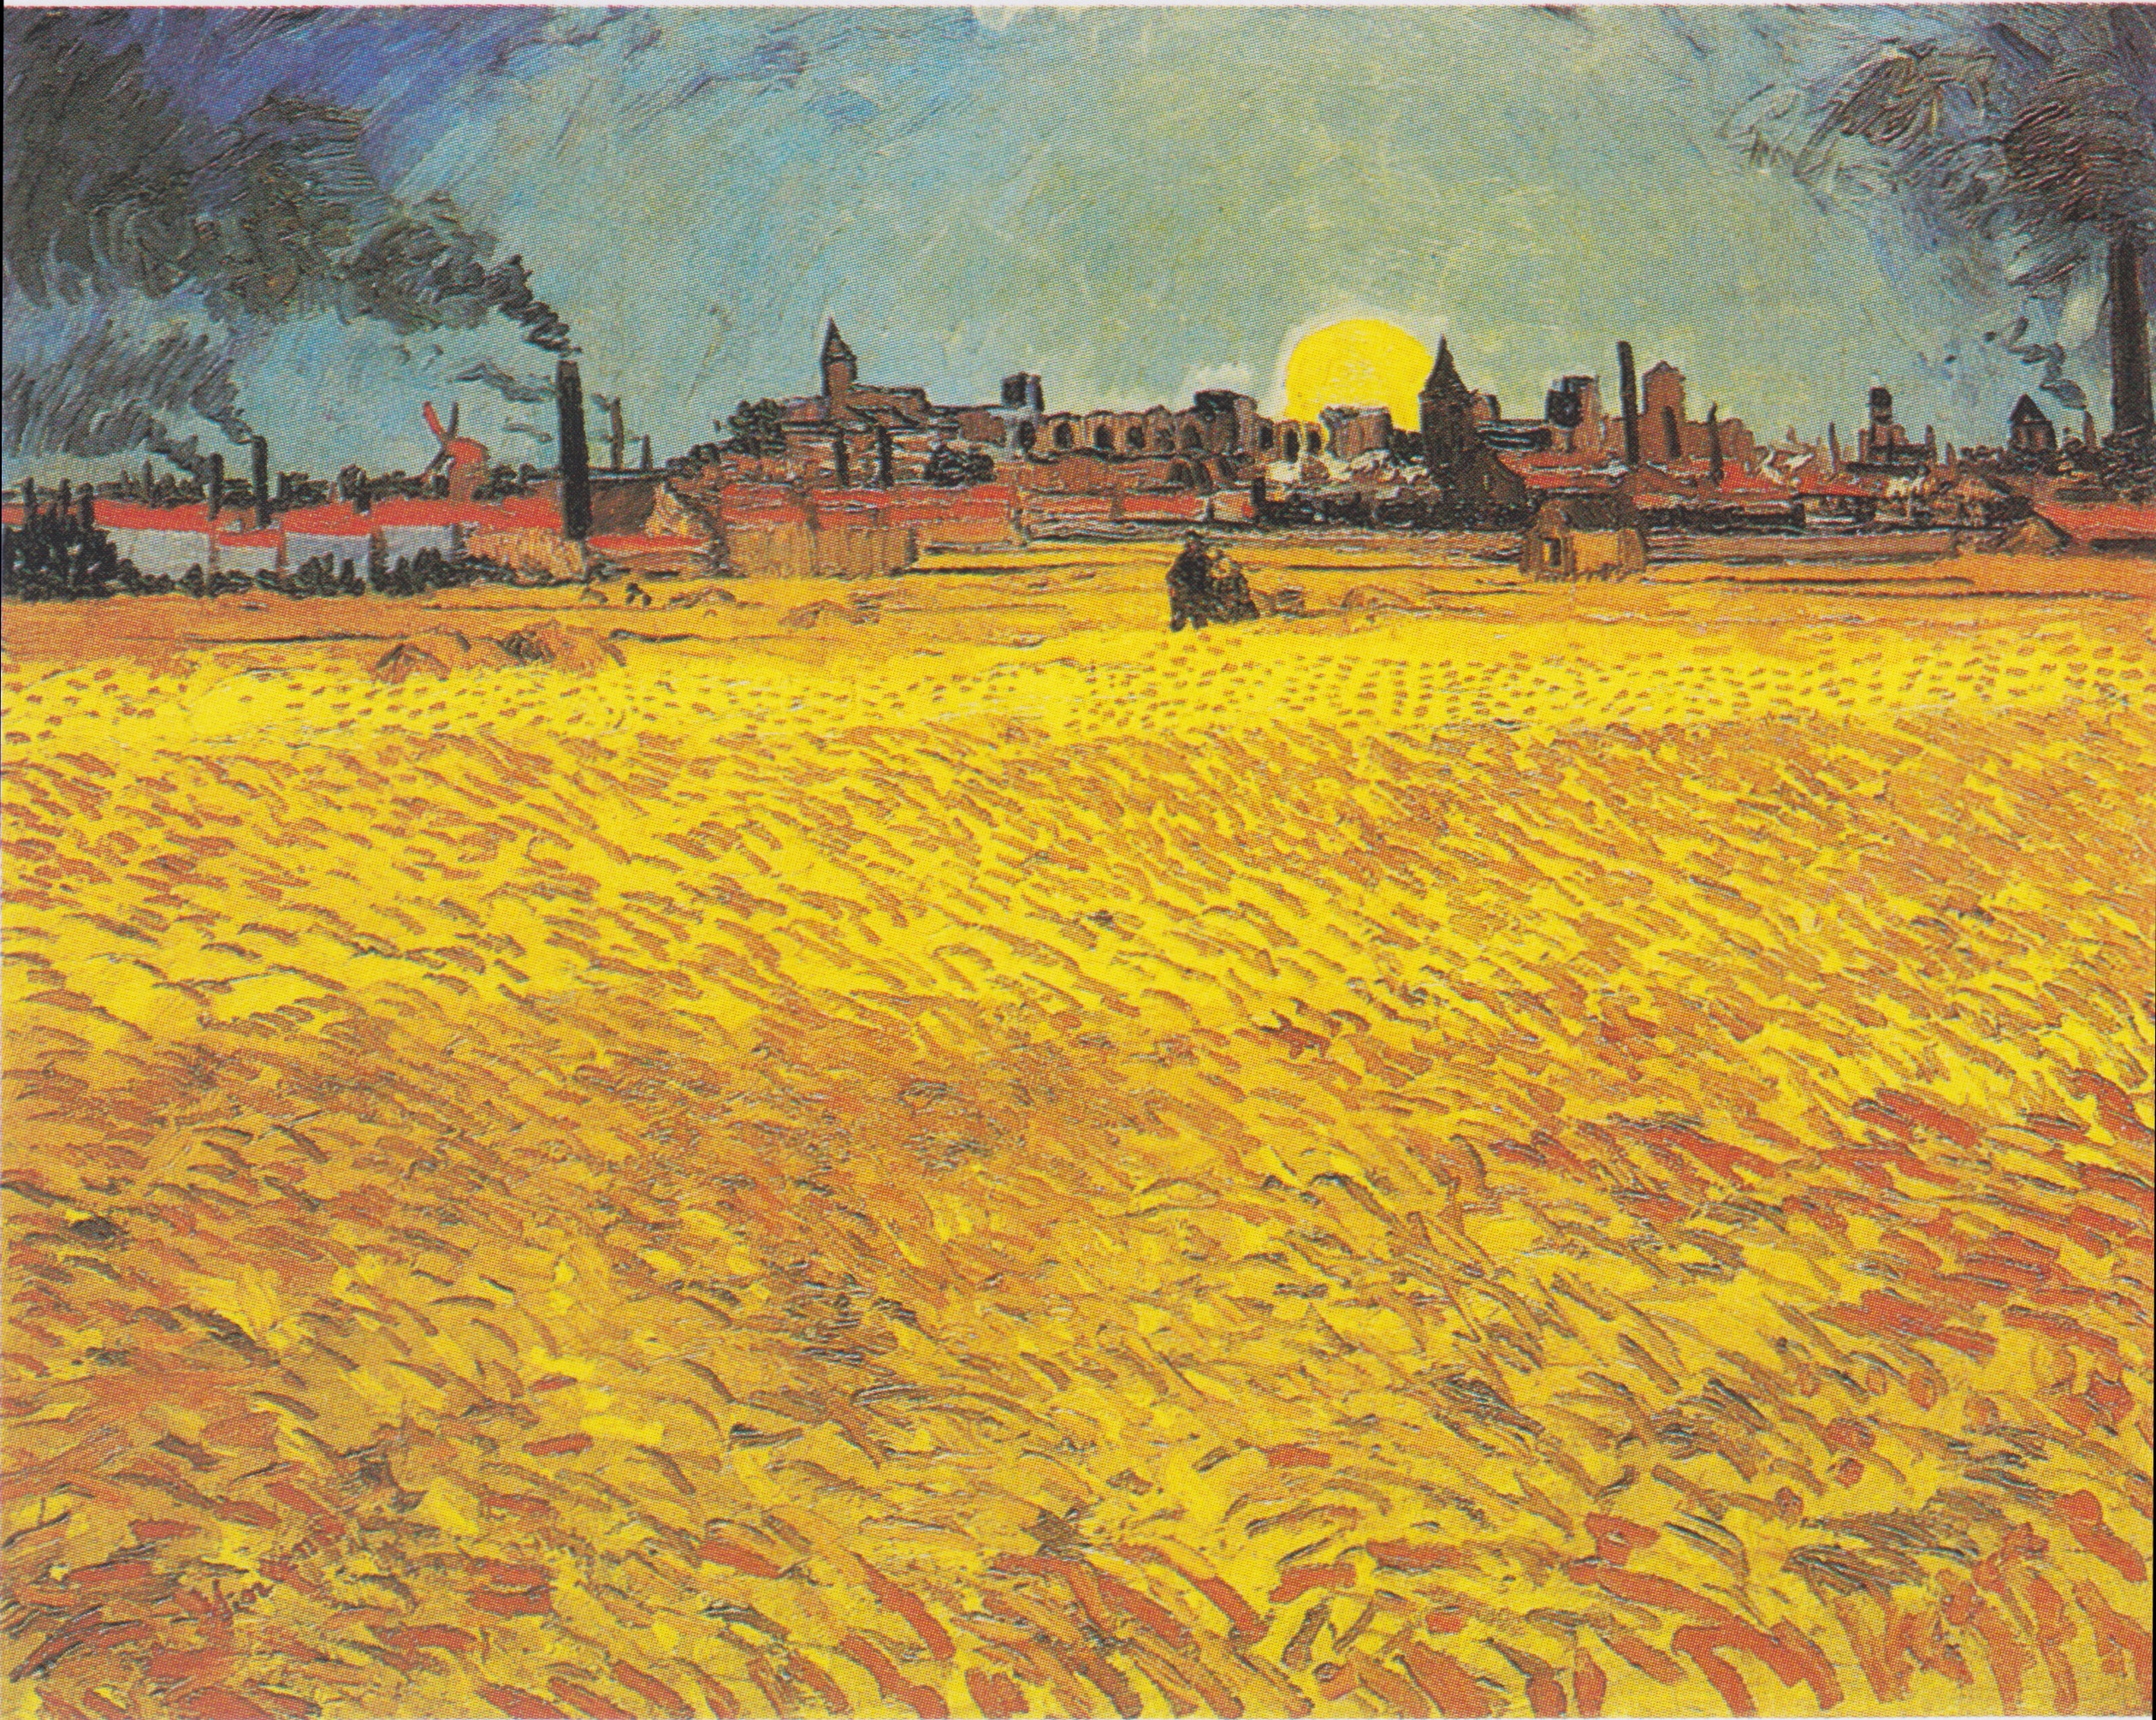 Sunset Wheat field near Arles by Vincent van Gogh-Landscape Painting